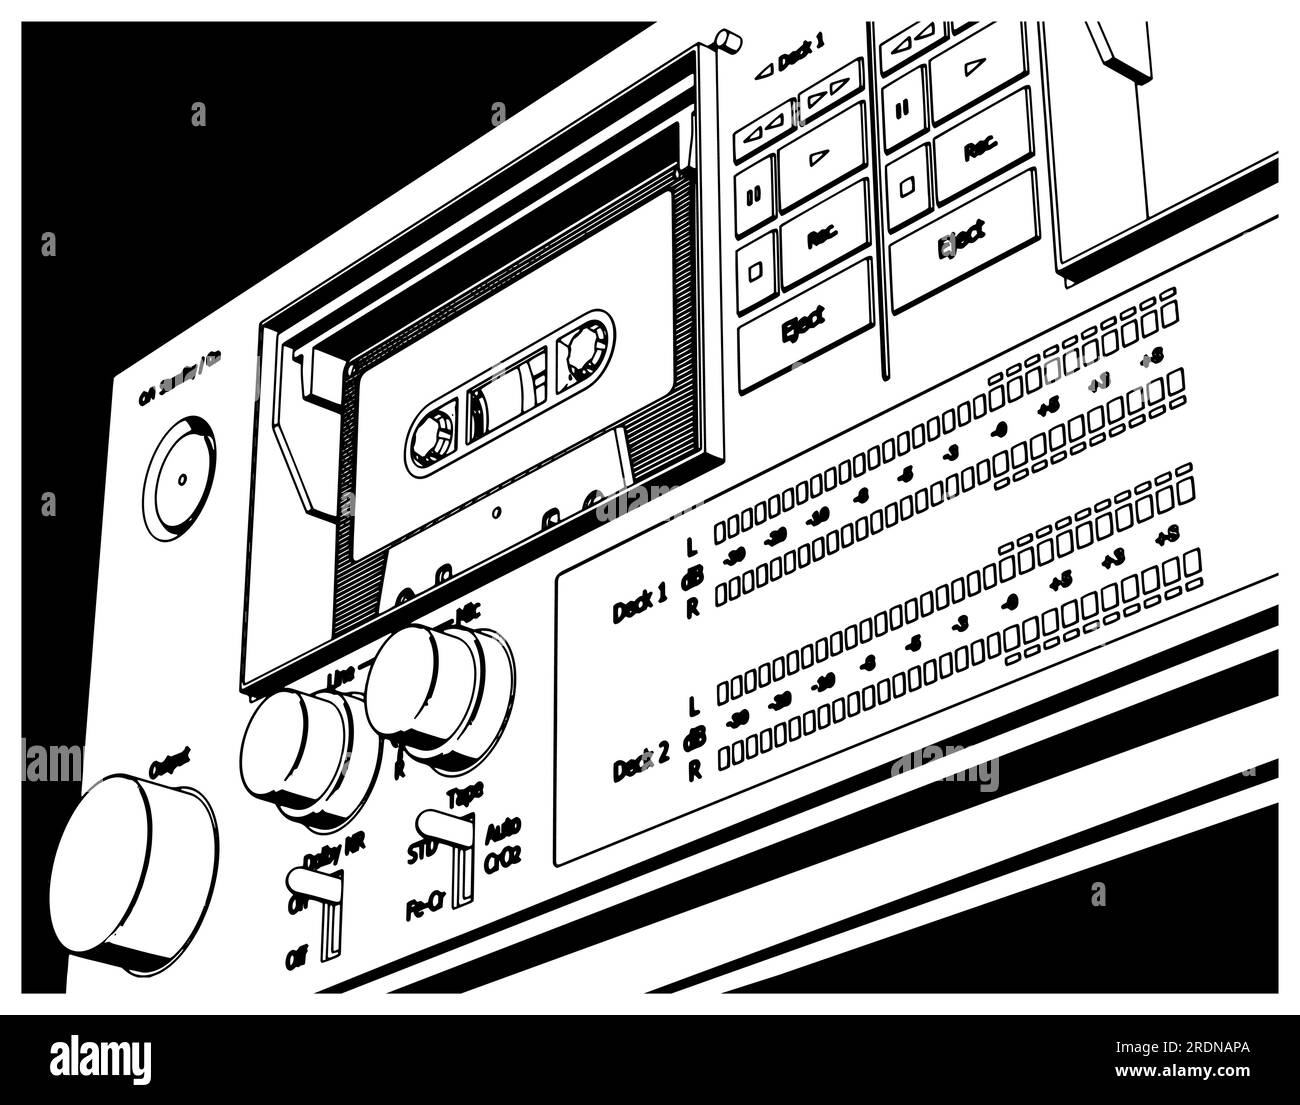 Stylized vector illustration of a cassette deck of a tape recorder close-up Stock Vector